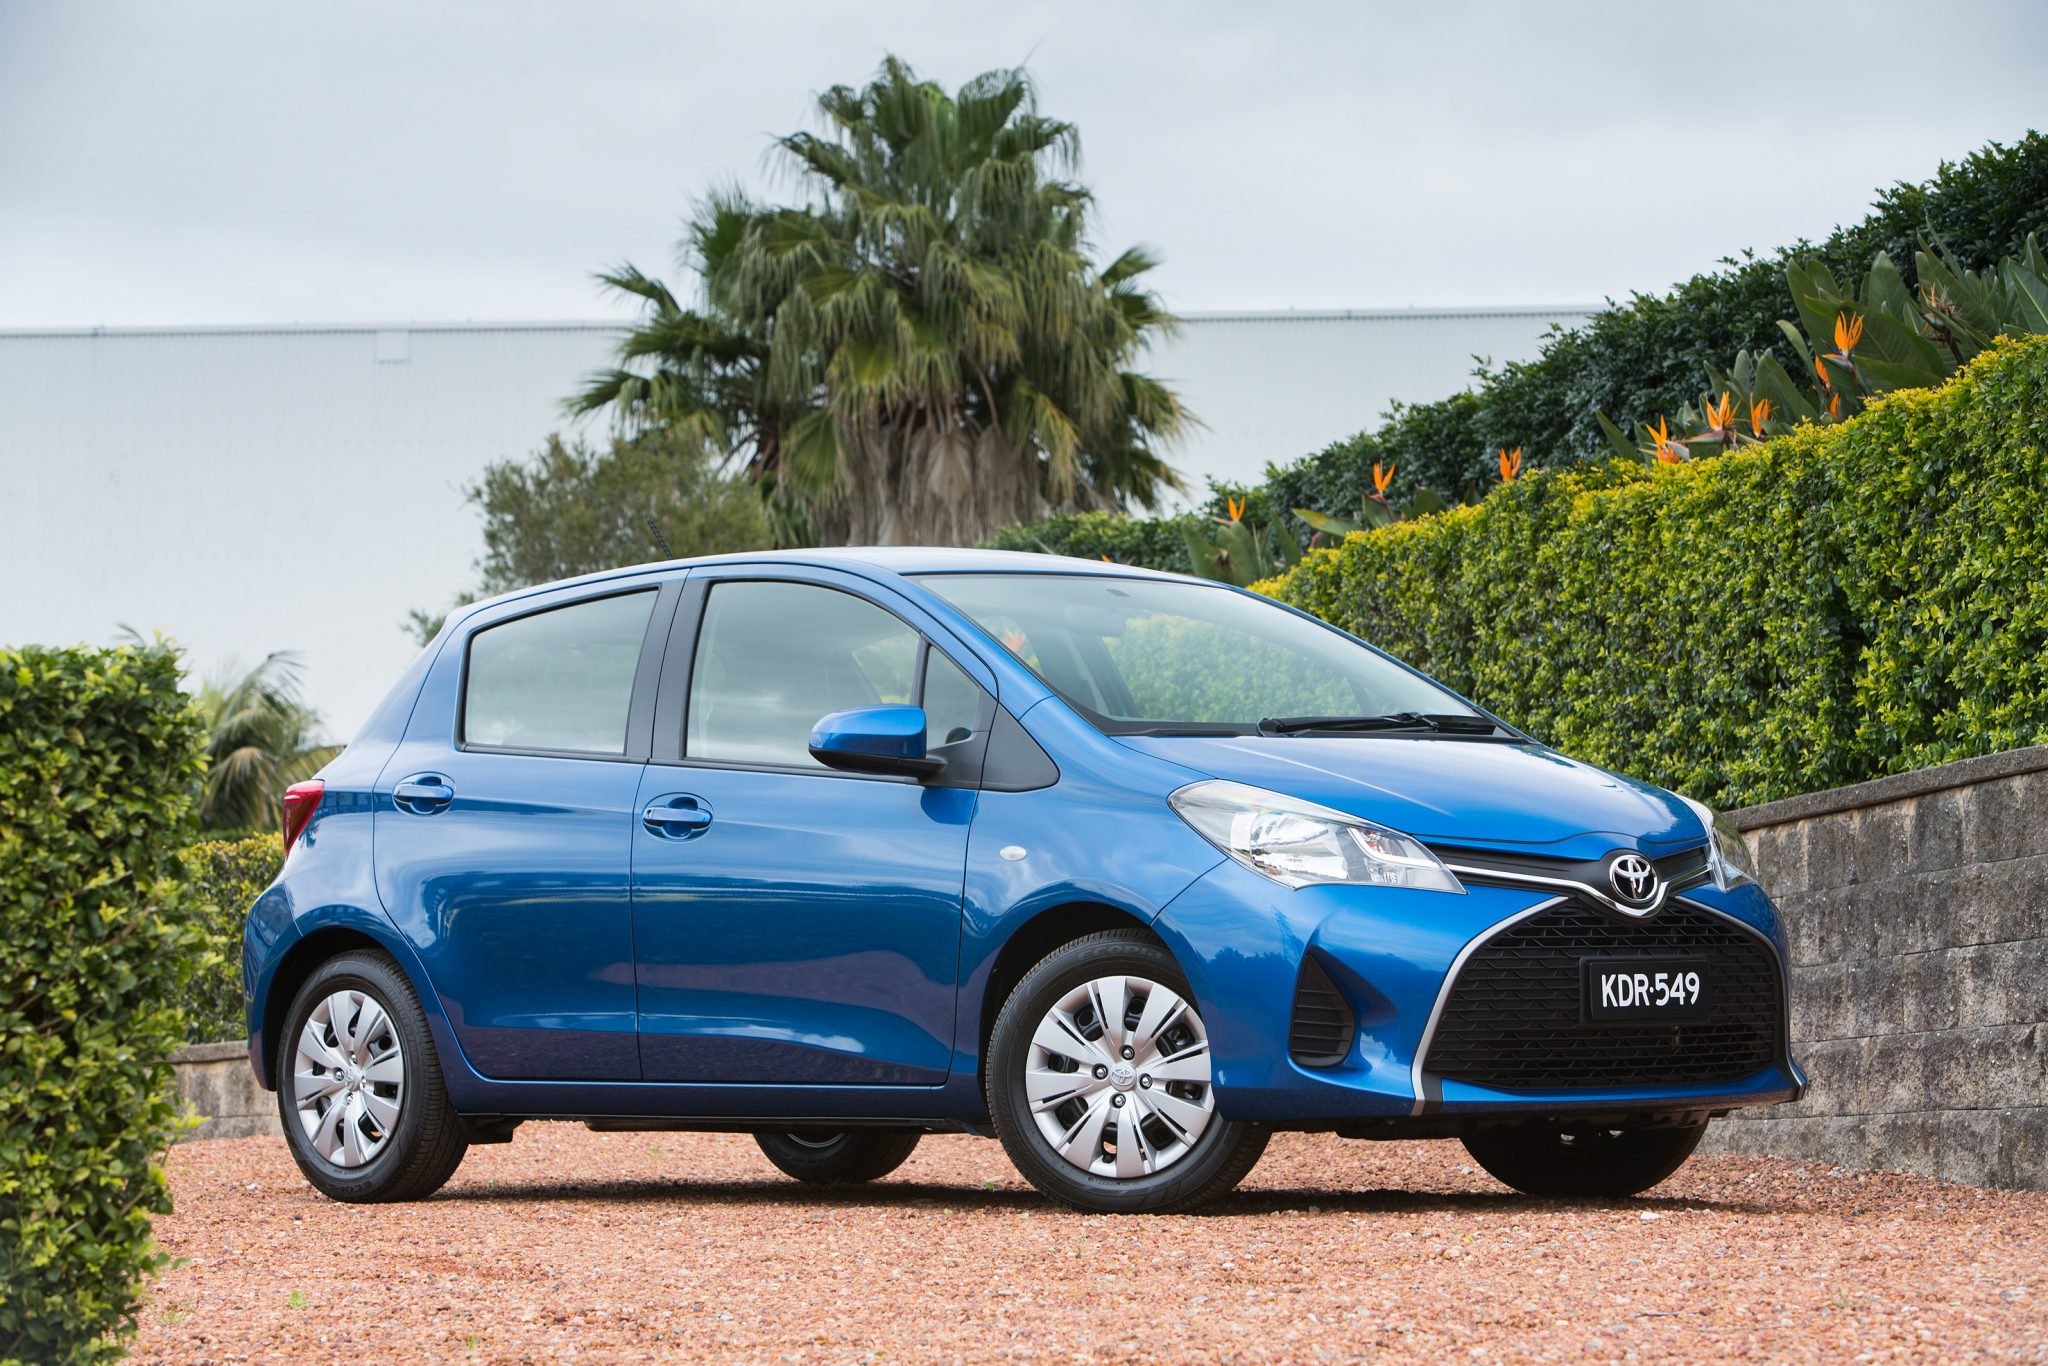 Toyota Cars - News: 2014 Toyota Yaris hatch pricing and specs